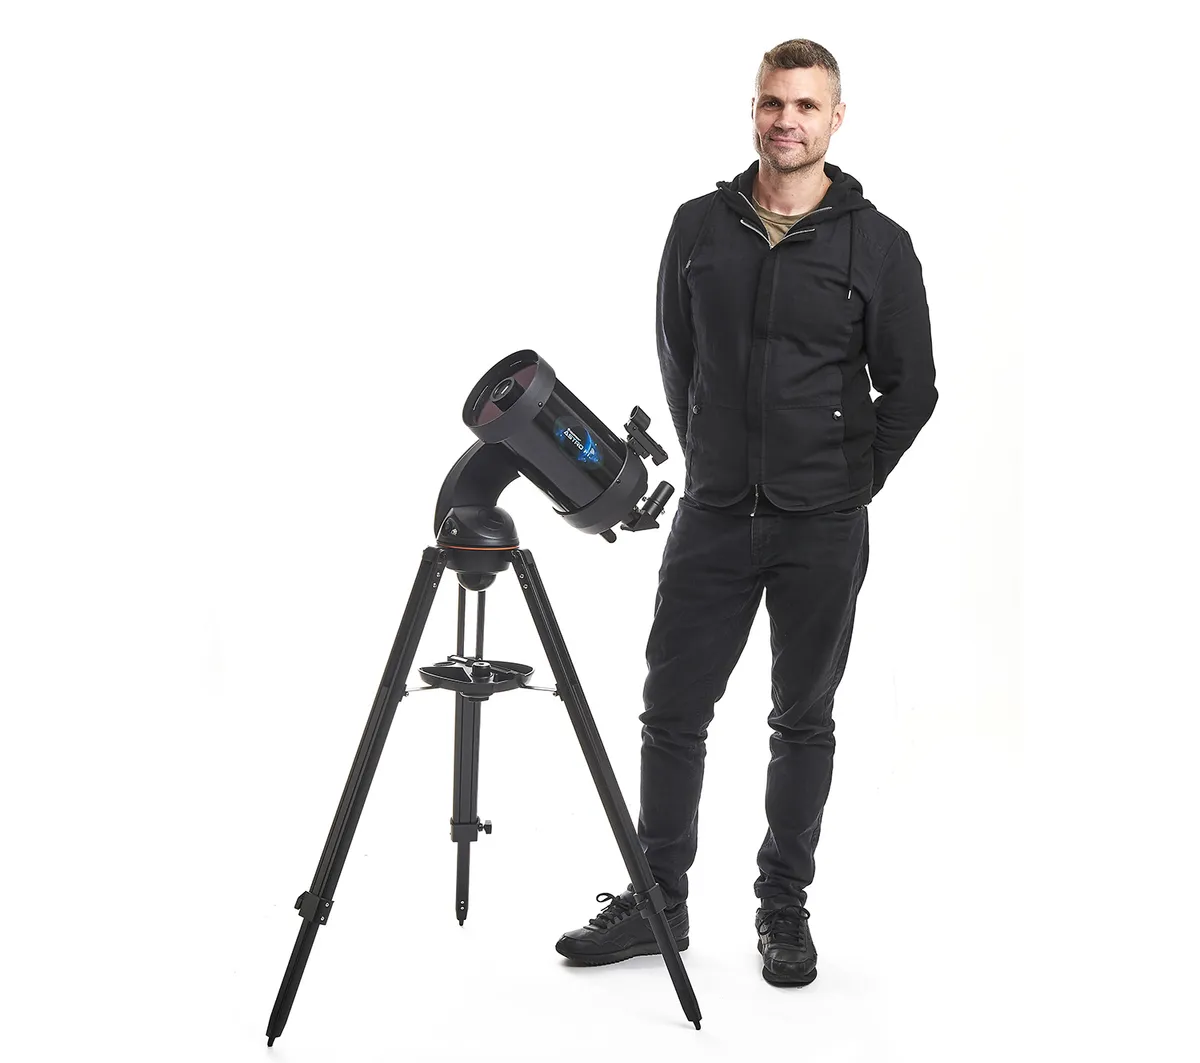 Look out for Celestron Black Friday telescope deals, including on the Astro Fi 6 Schmidt-Cassegrain.